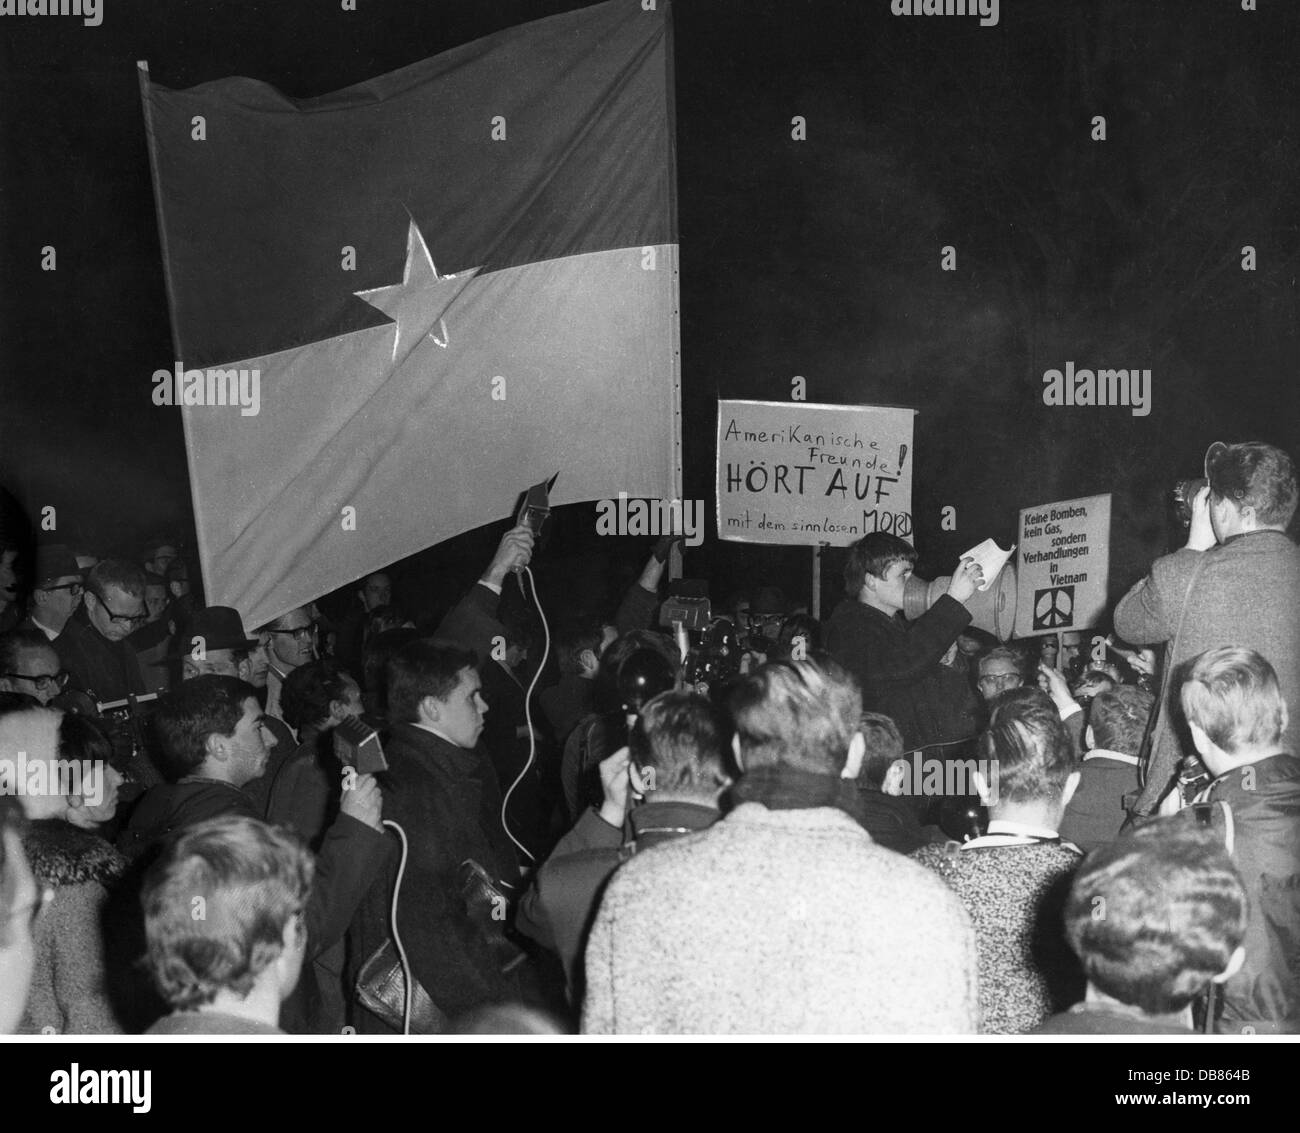 demonstrations, Germany, students protestig against the Vietnam War, Munich, Germany, 24.2.1966, Additional-Rights-Clearences-Not Available Stock Photo